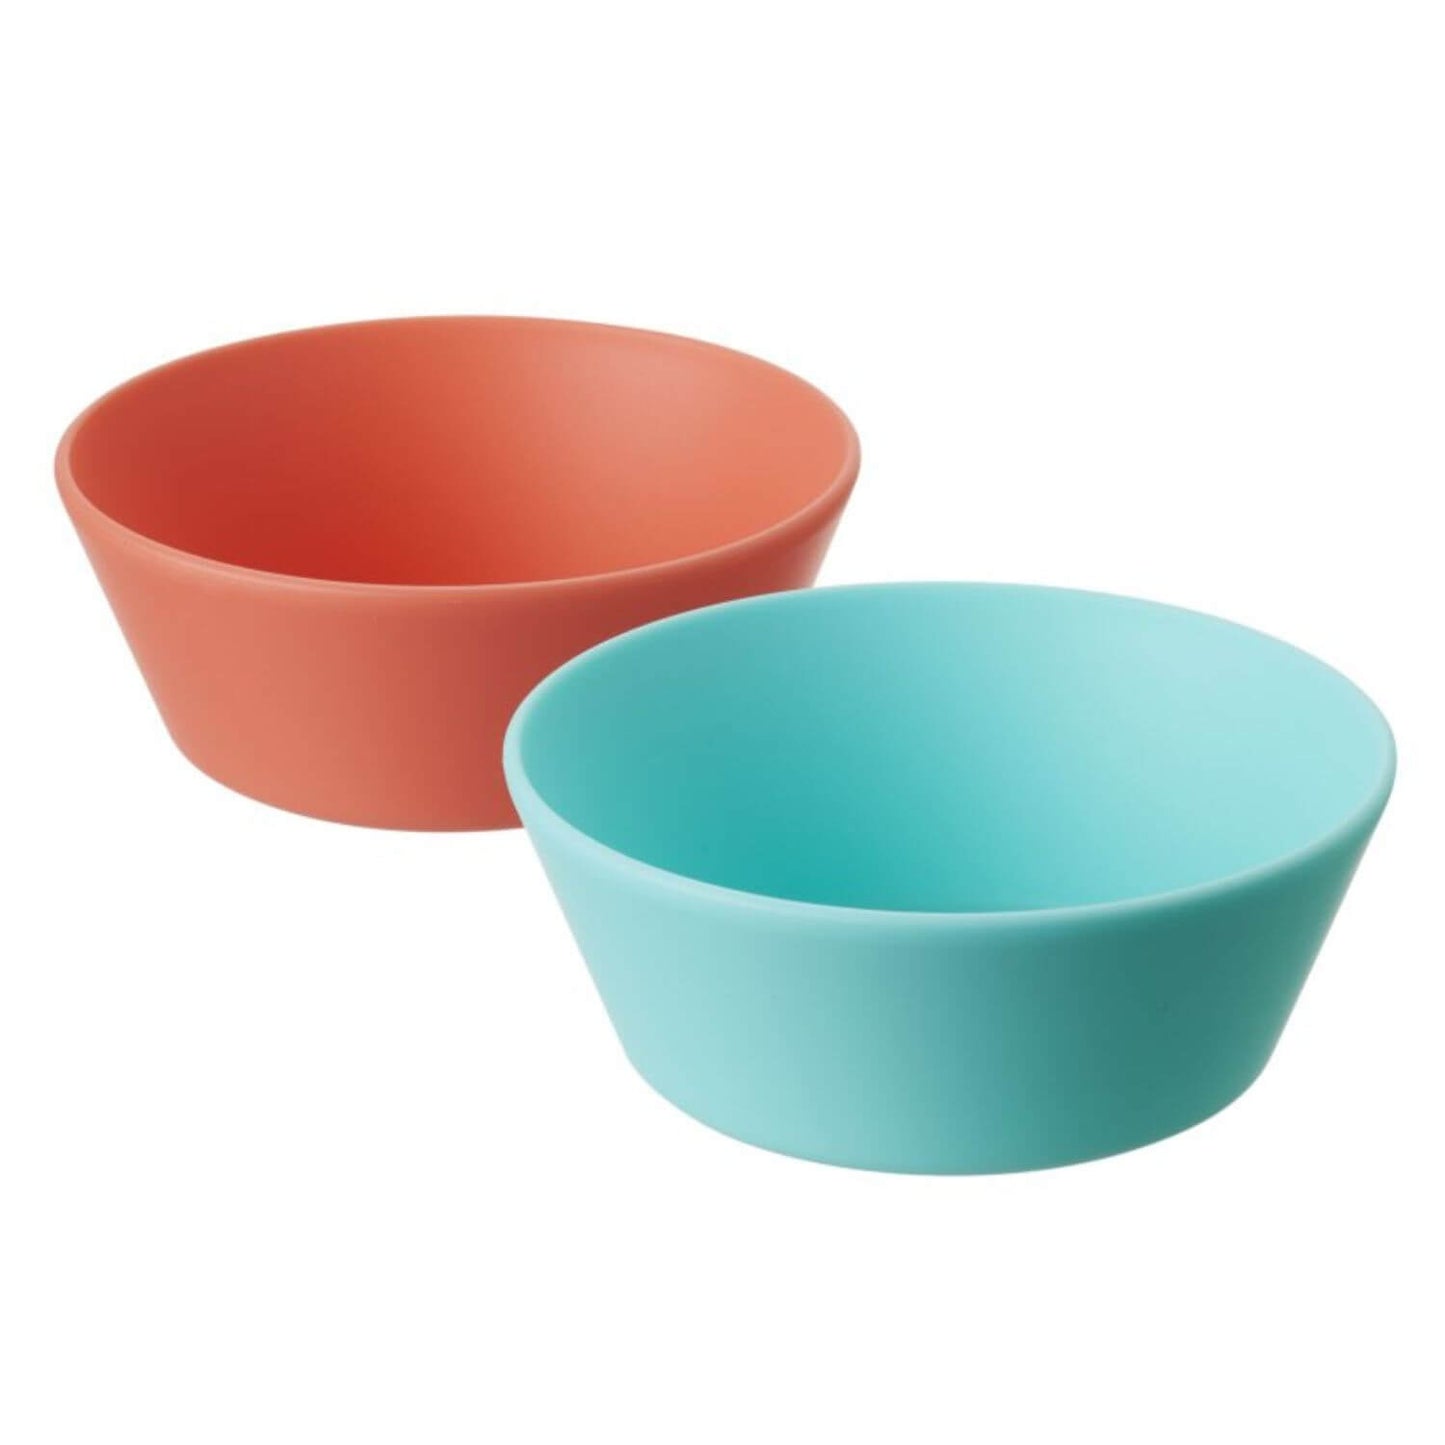 Nuby Bright Bowls 2 Pack